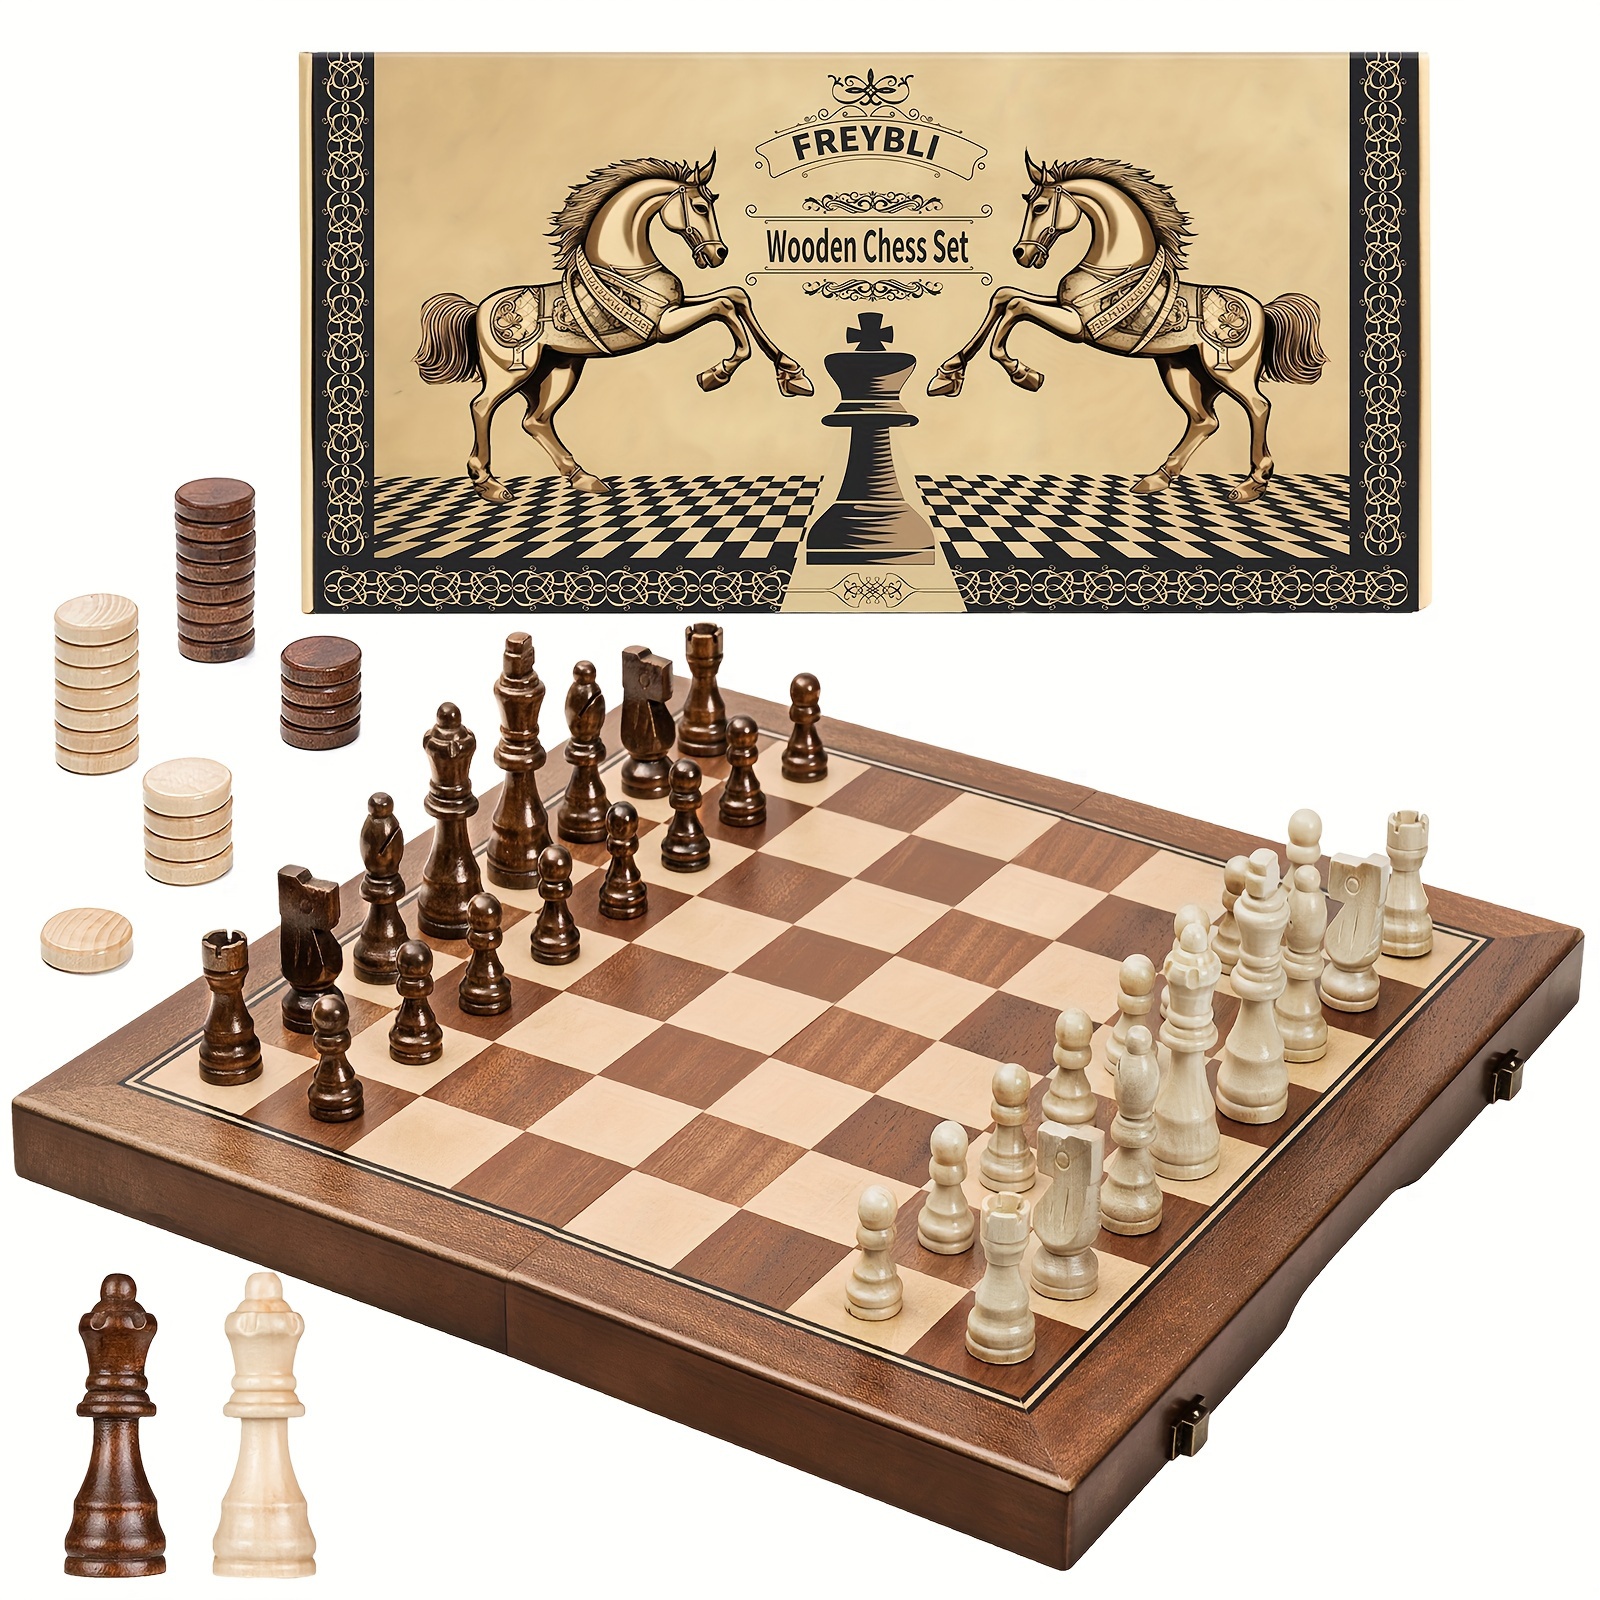 

Wooden Chess Board Set For Adults Professional, Handcrafted 15 Inch (2 In 1) Chess And Set, 2 Extra Queens, Gift Package